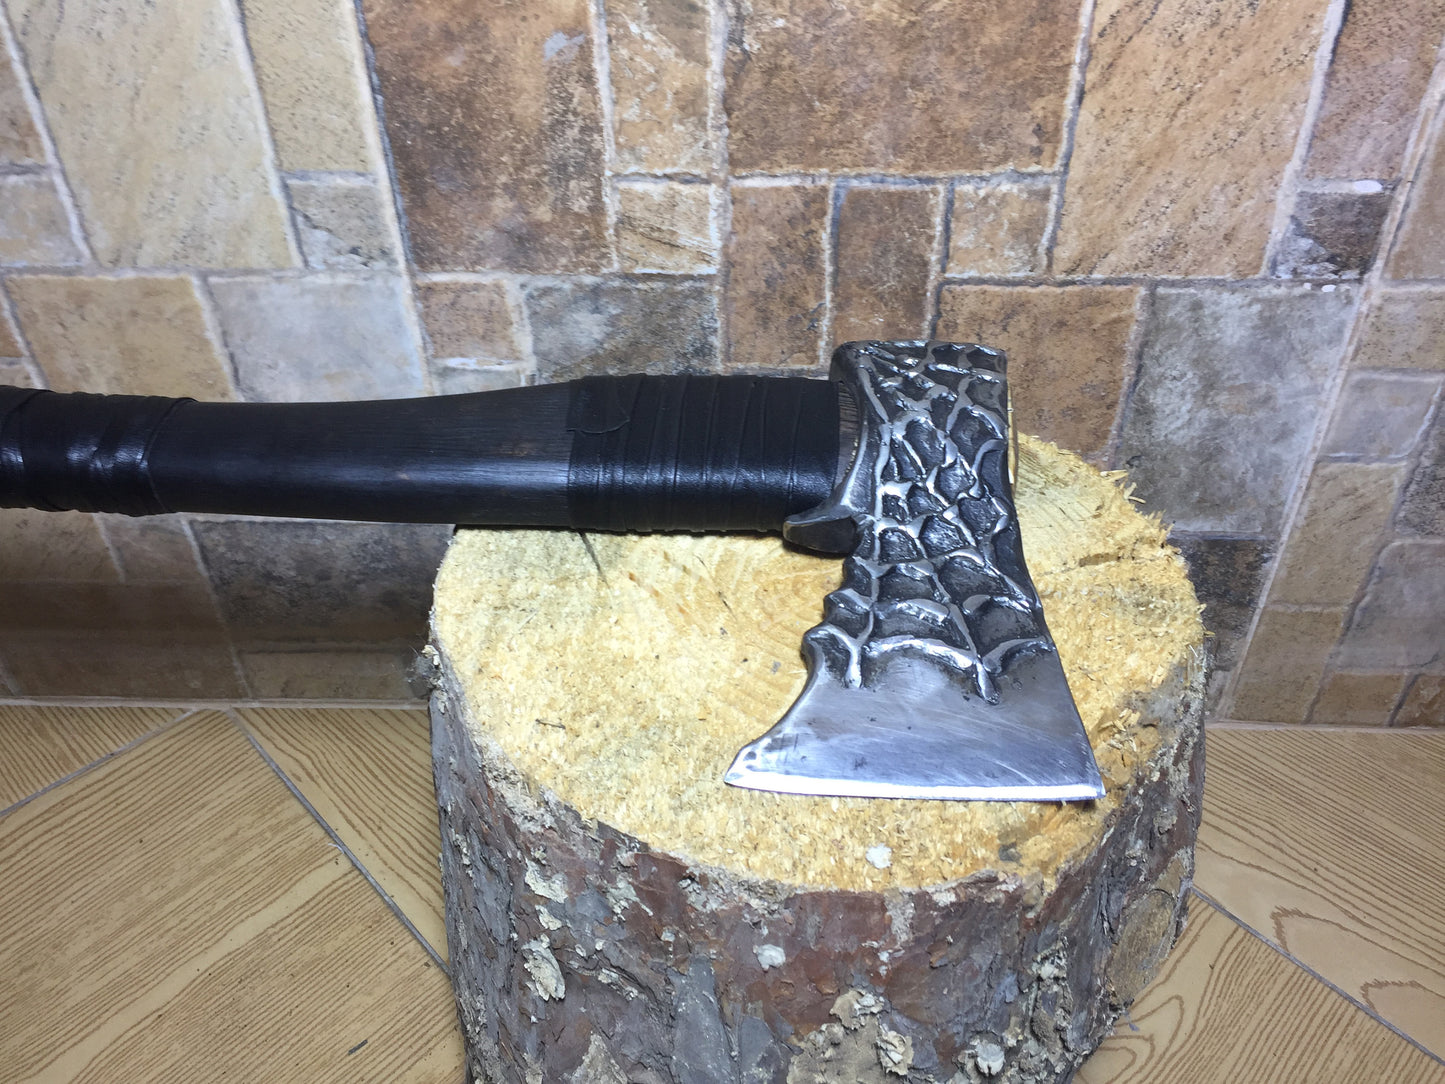 Viking axe, medieval axe, iron gift for him, tomahawk, hatchet, hiking, hunting, mens gifts, chopping axe, gifts for men, manly iron gifts